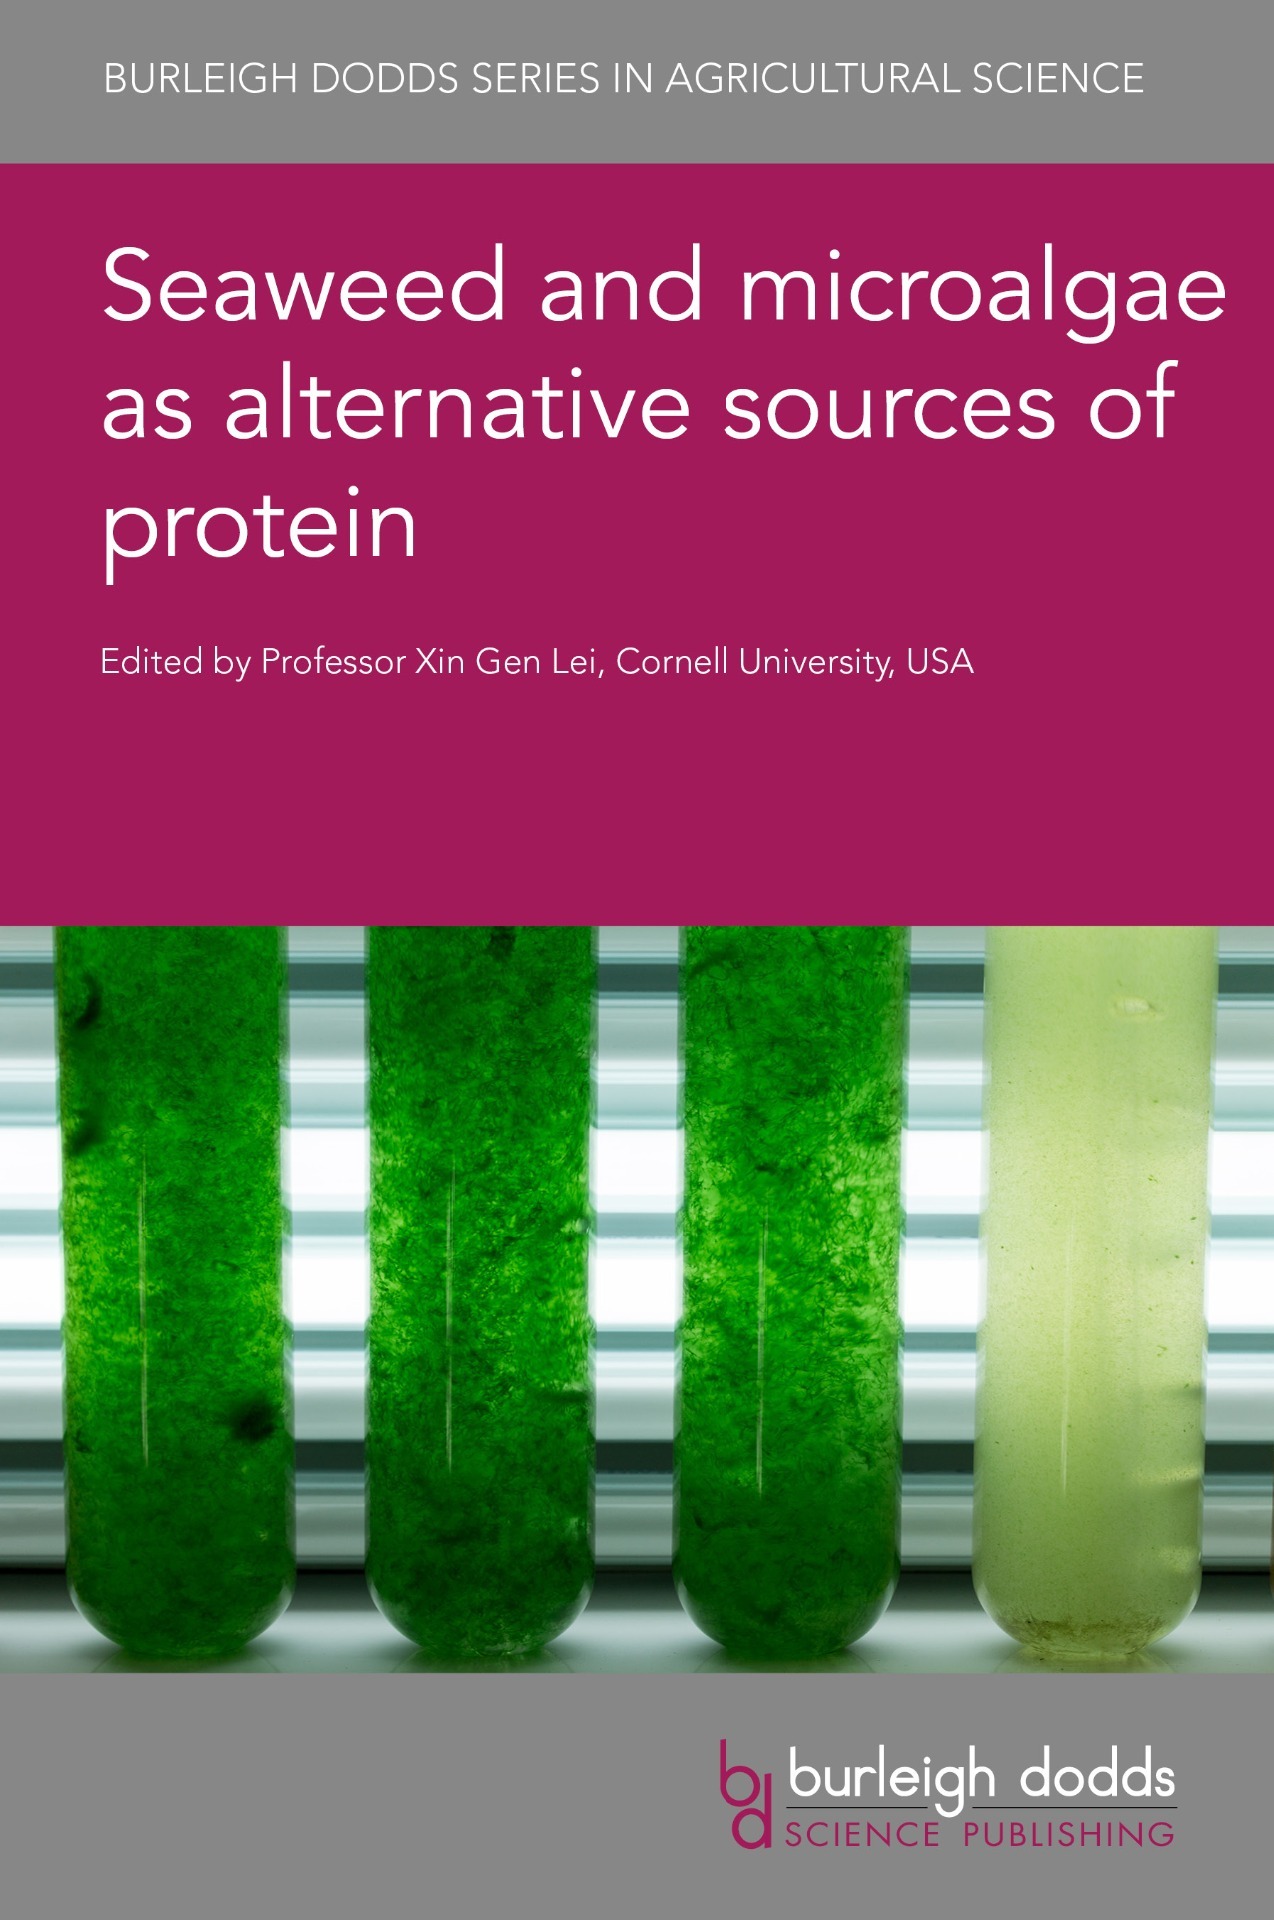 Seaweed and microalgae as alternative sources of protein